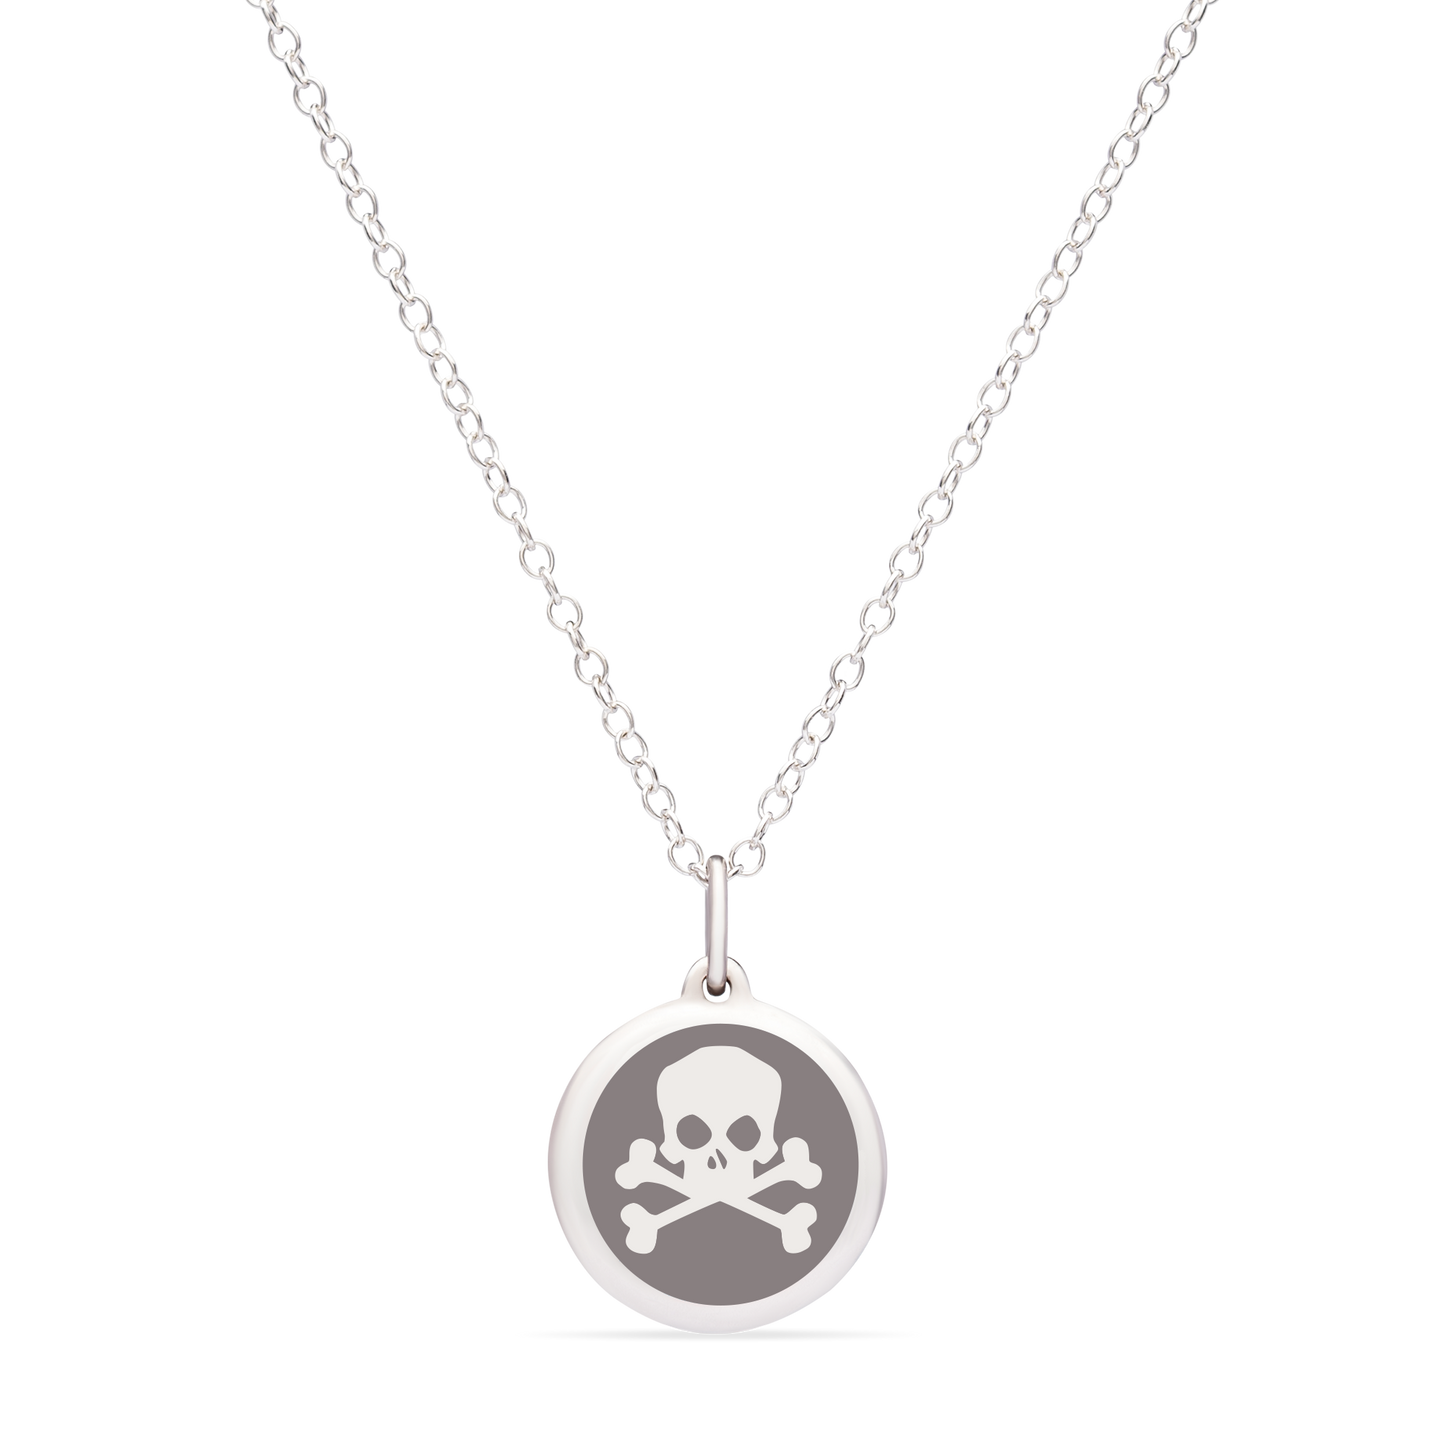 MINI SKULL CHARM sterling silver with rhodium plate